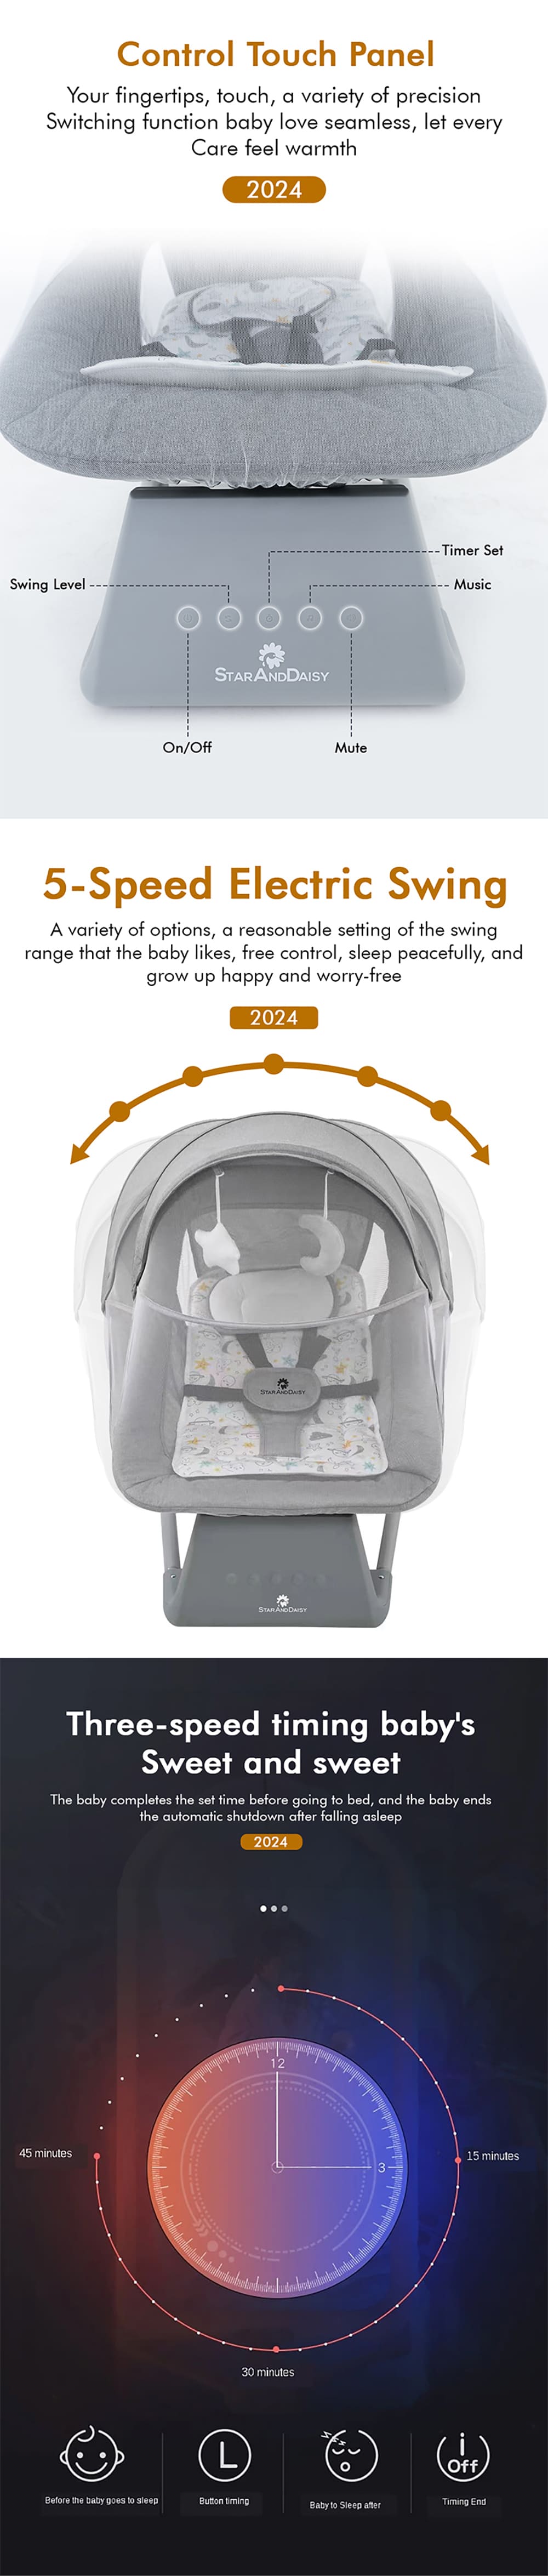 Electric Baby Cradle with One Touch Panel